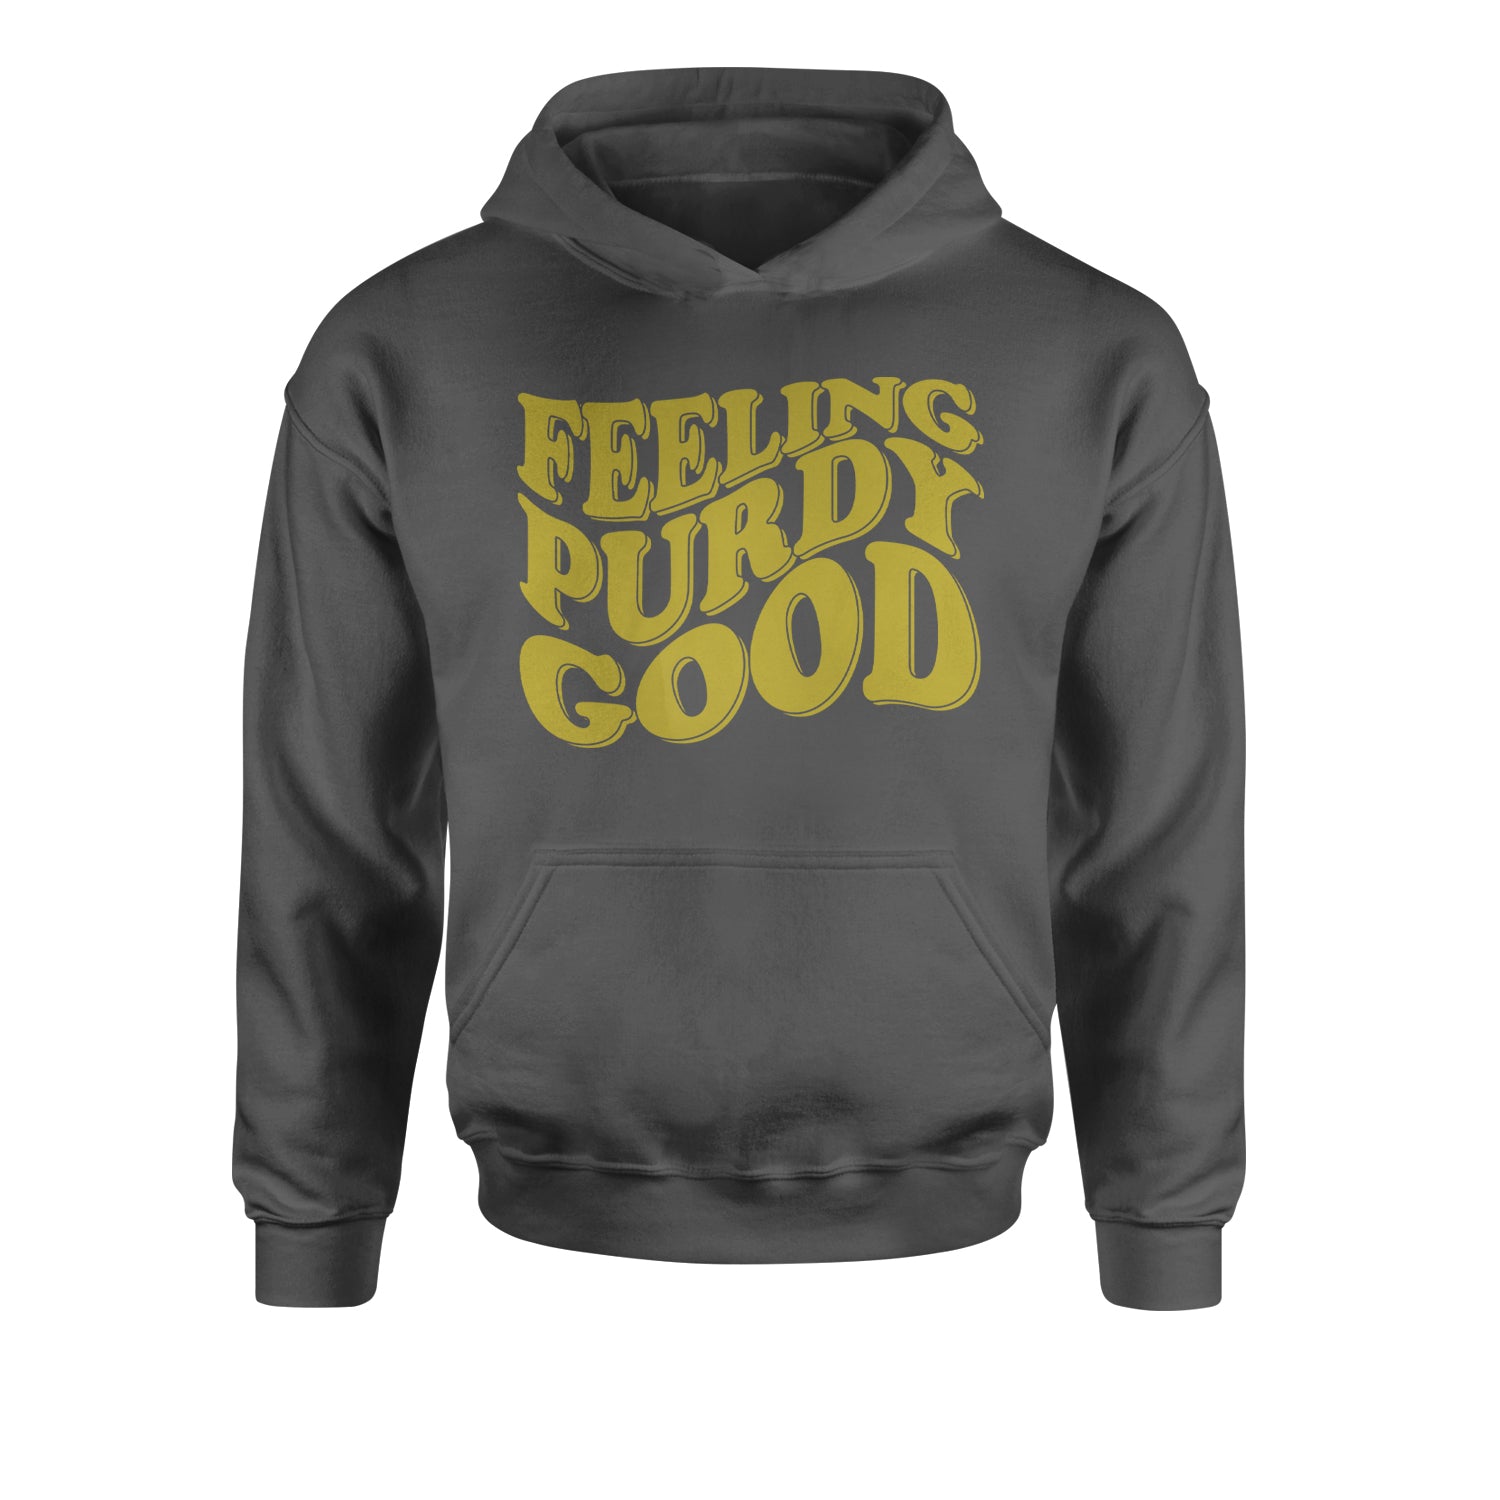 Feeling Purdy Good Youth-Sized Hoodie 13, football by Expression Tees